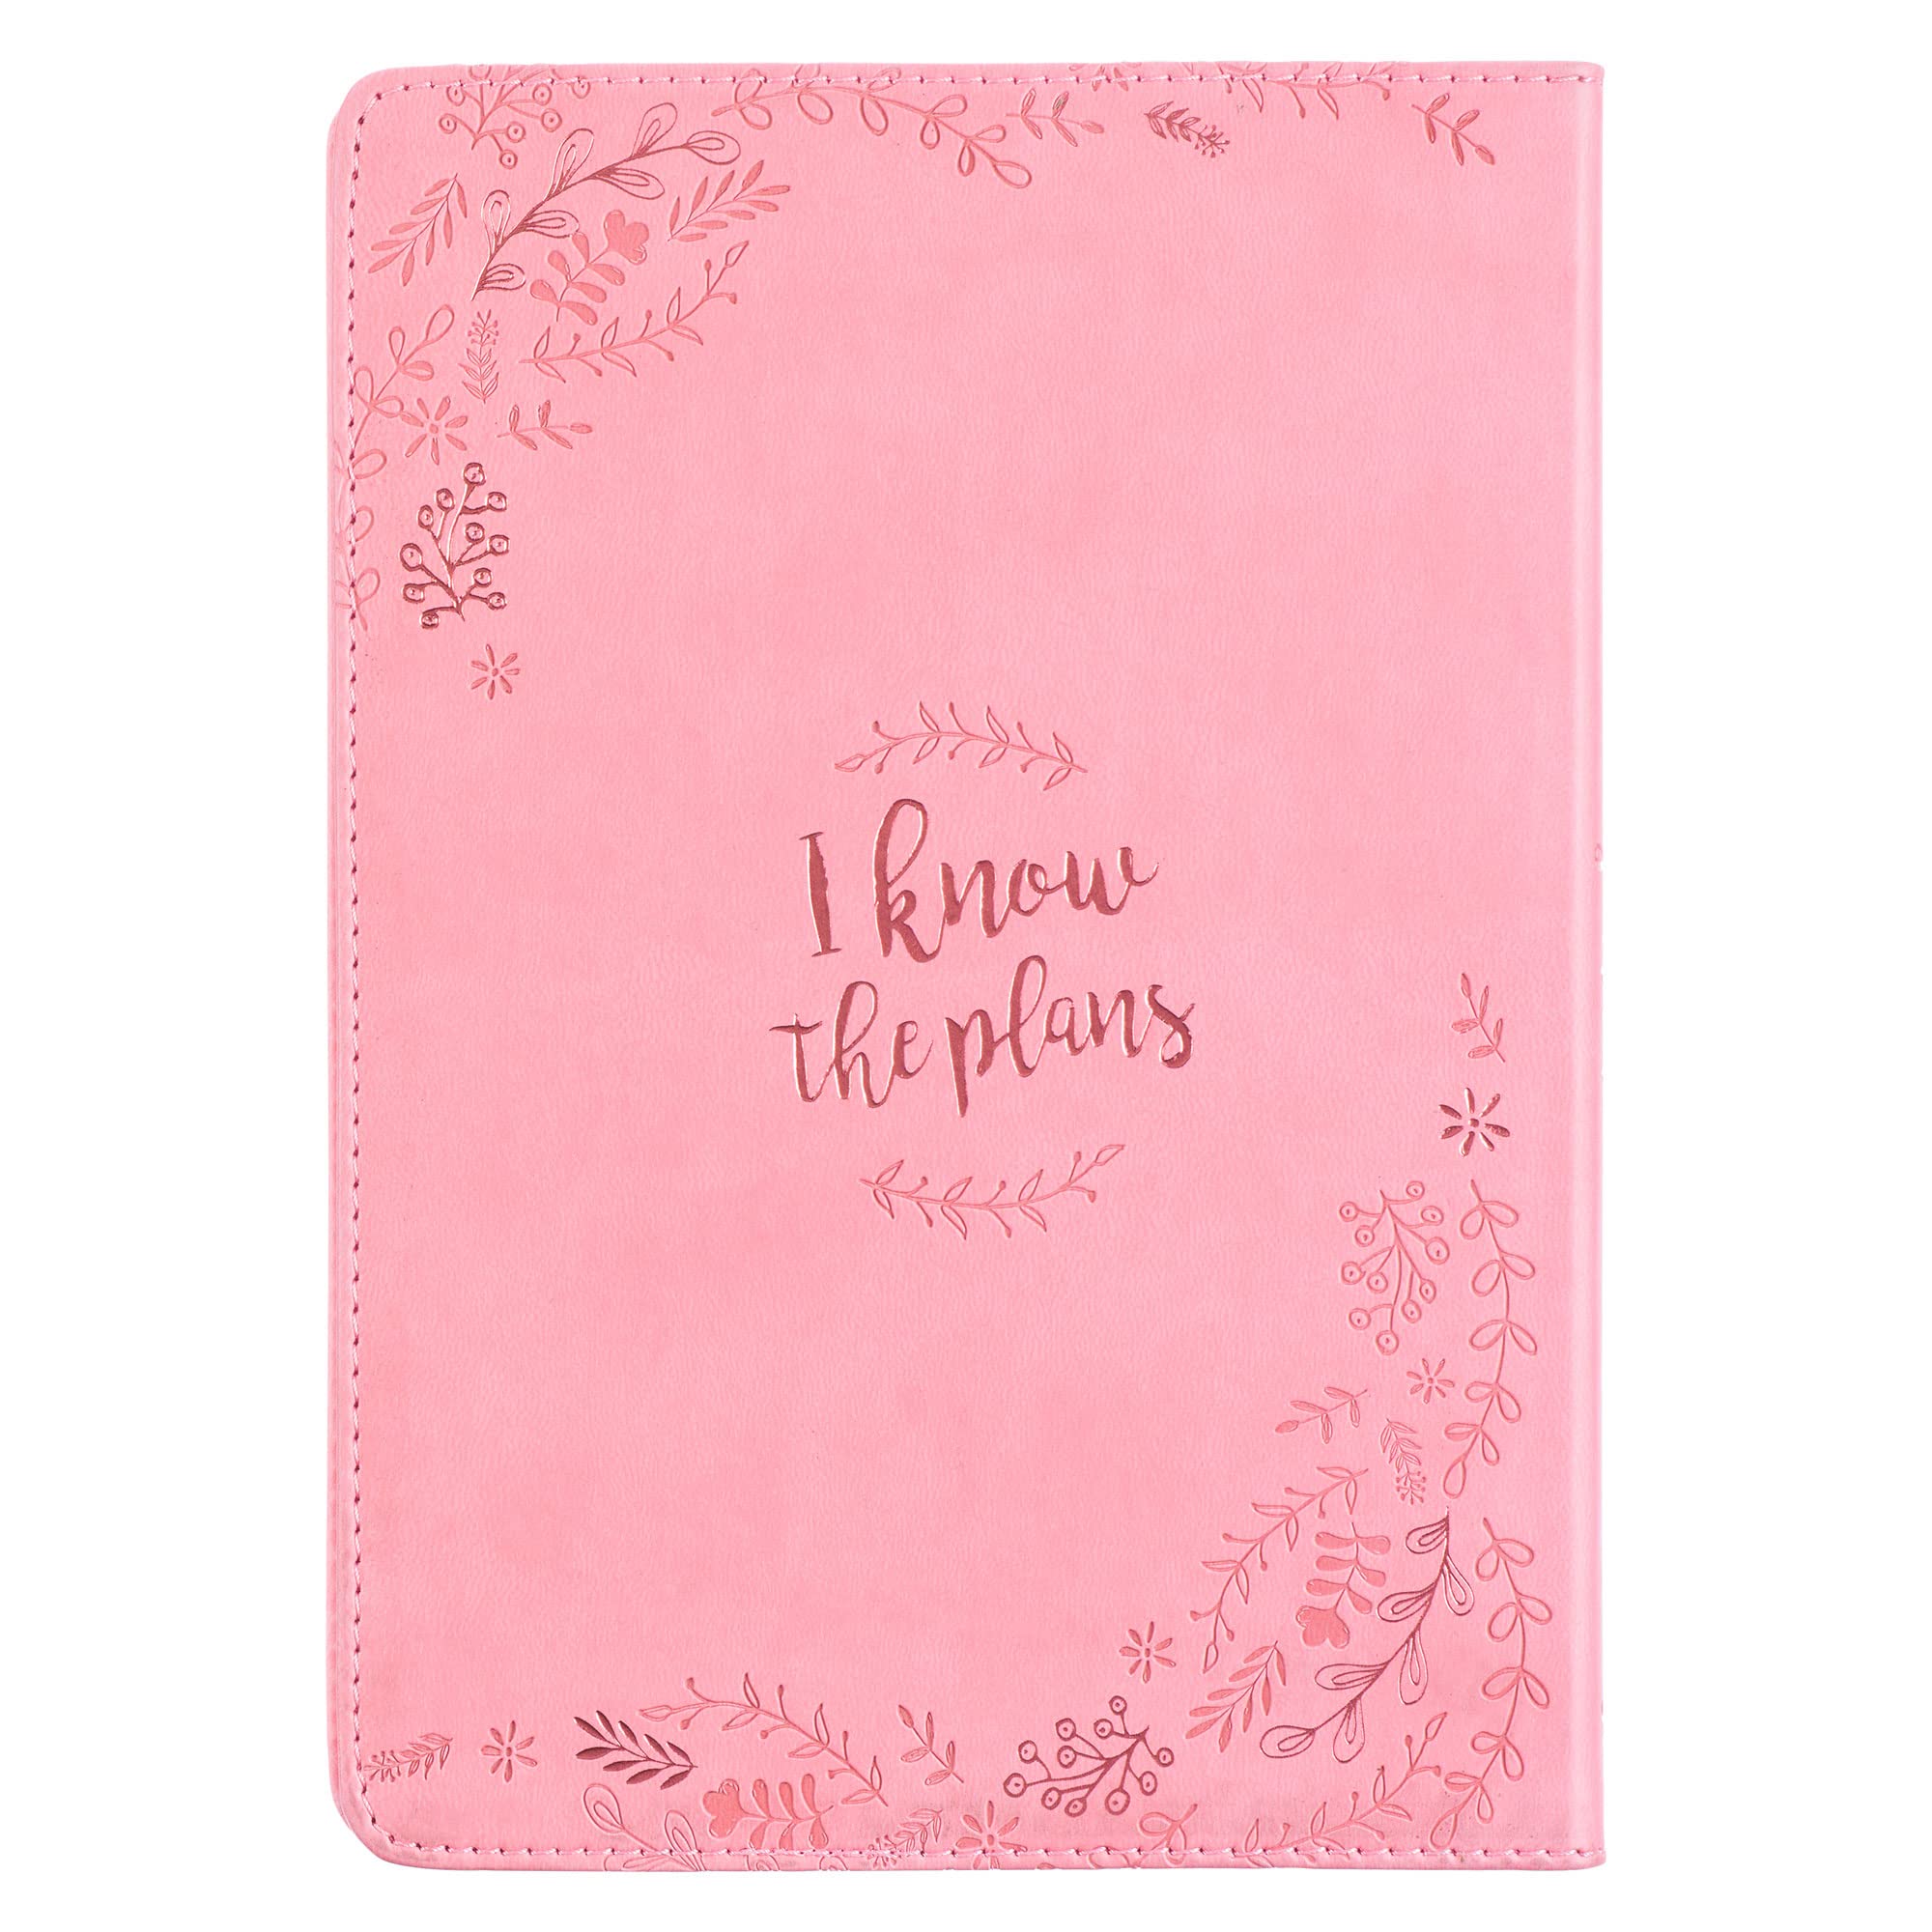 When She Speaks Proverbs 31 Woman Bible Verse Ivory Faux Leather Journal In